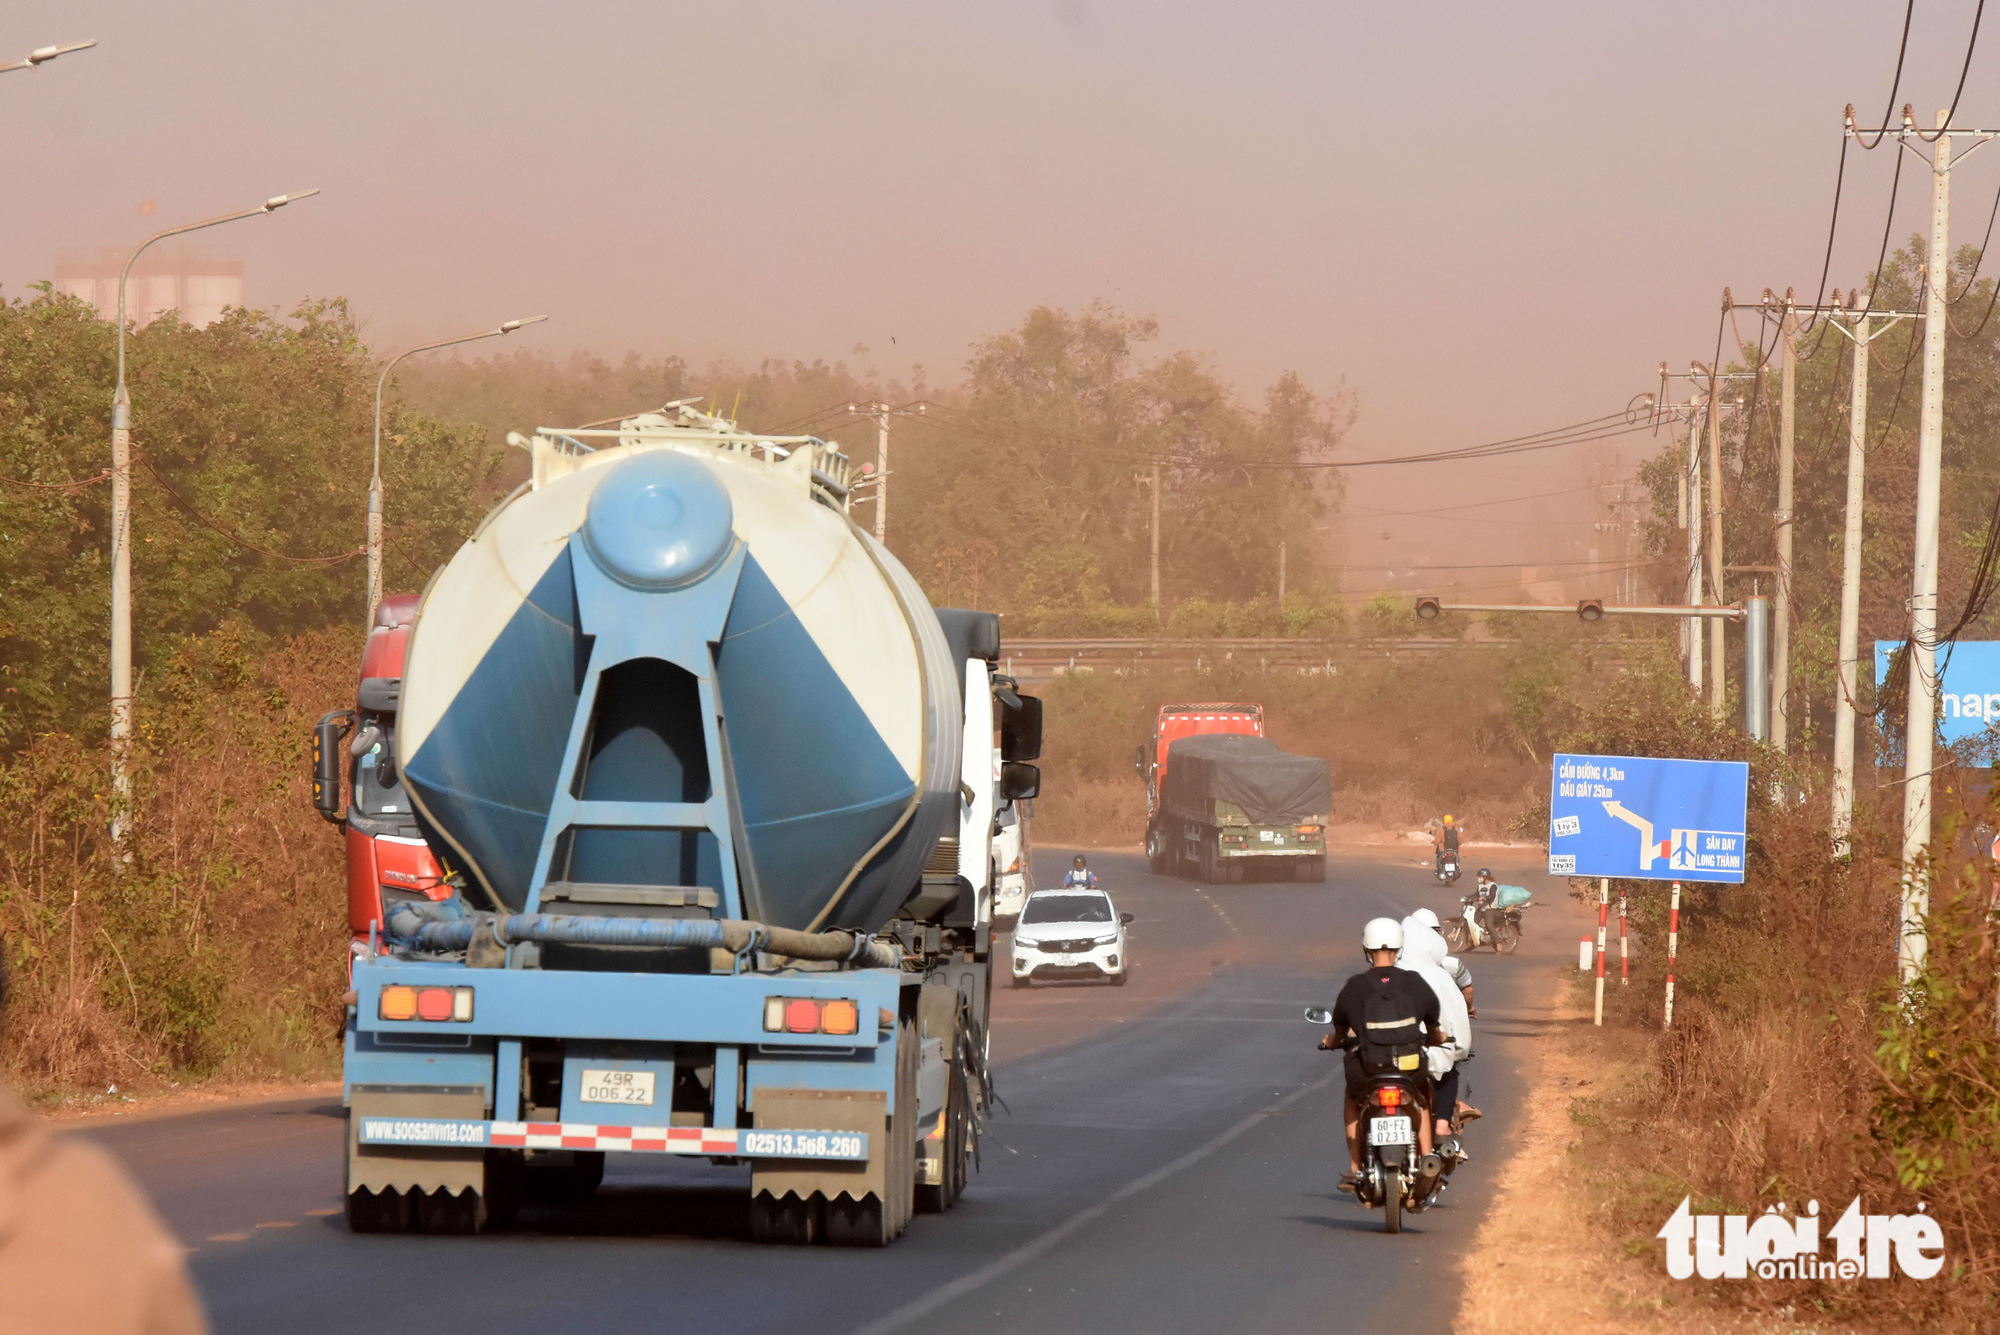 Vehicles travel on Provincial Road 769 through a thick layer of dust from the construction site of the Long Thanh International Airport project in Dong Nai Province, southern Vietnam, March 28, 2023. Photo: A Loc / Tuoi Tre